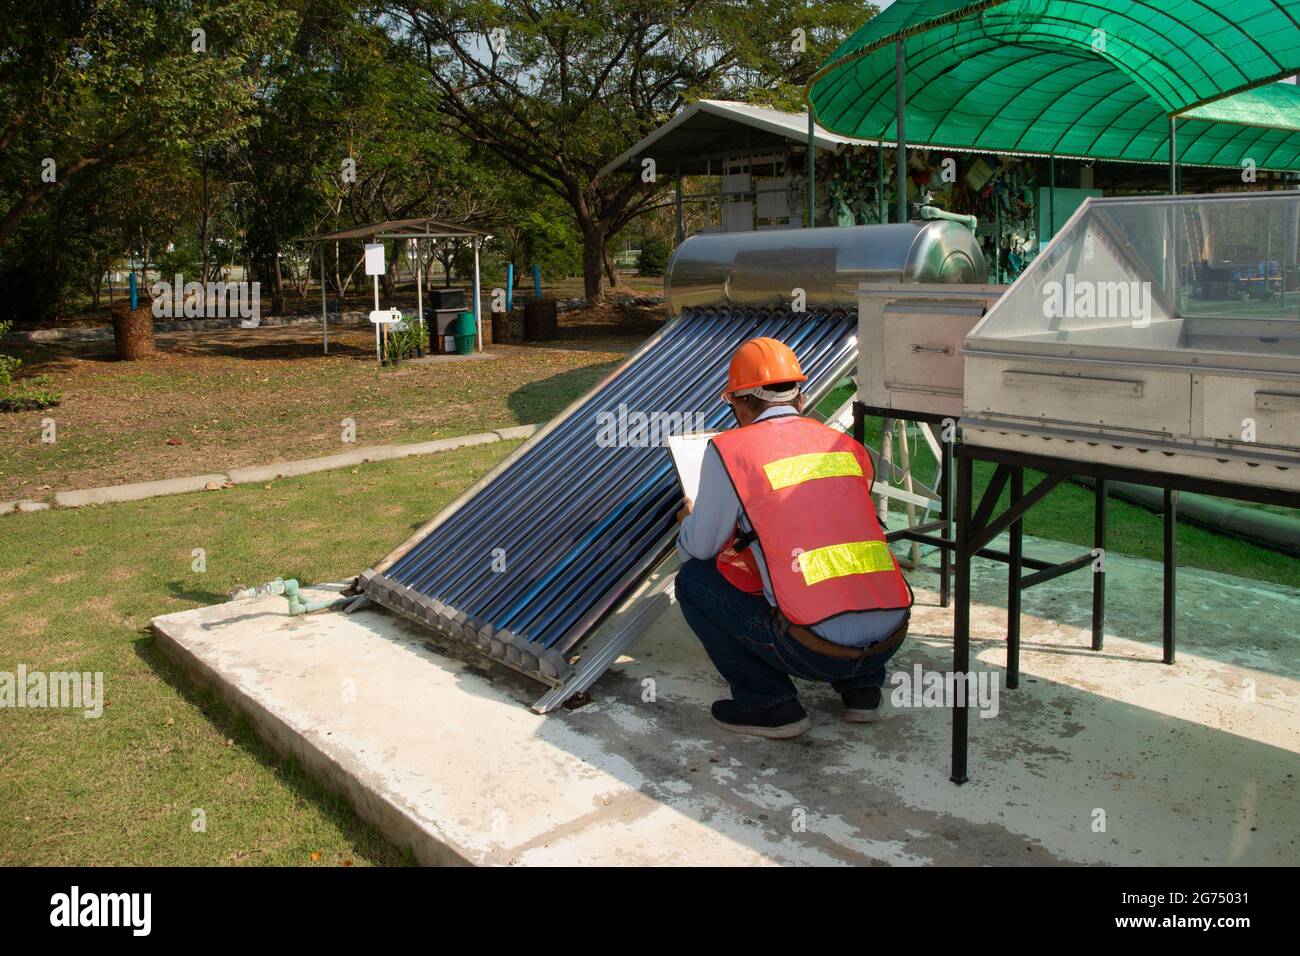 The Asian worker in uniform and helmet checks concentrating Solar Power with Flat Plat collector and Evacuum Tube Collector. Stock Photo